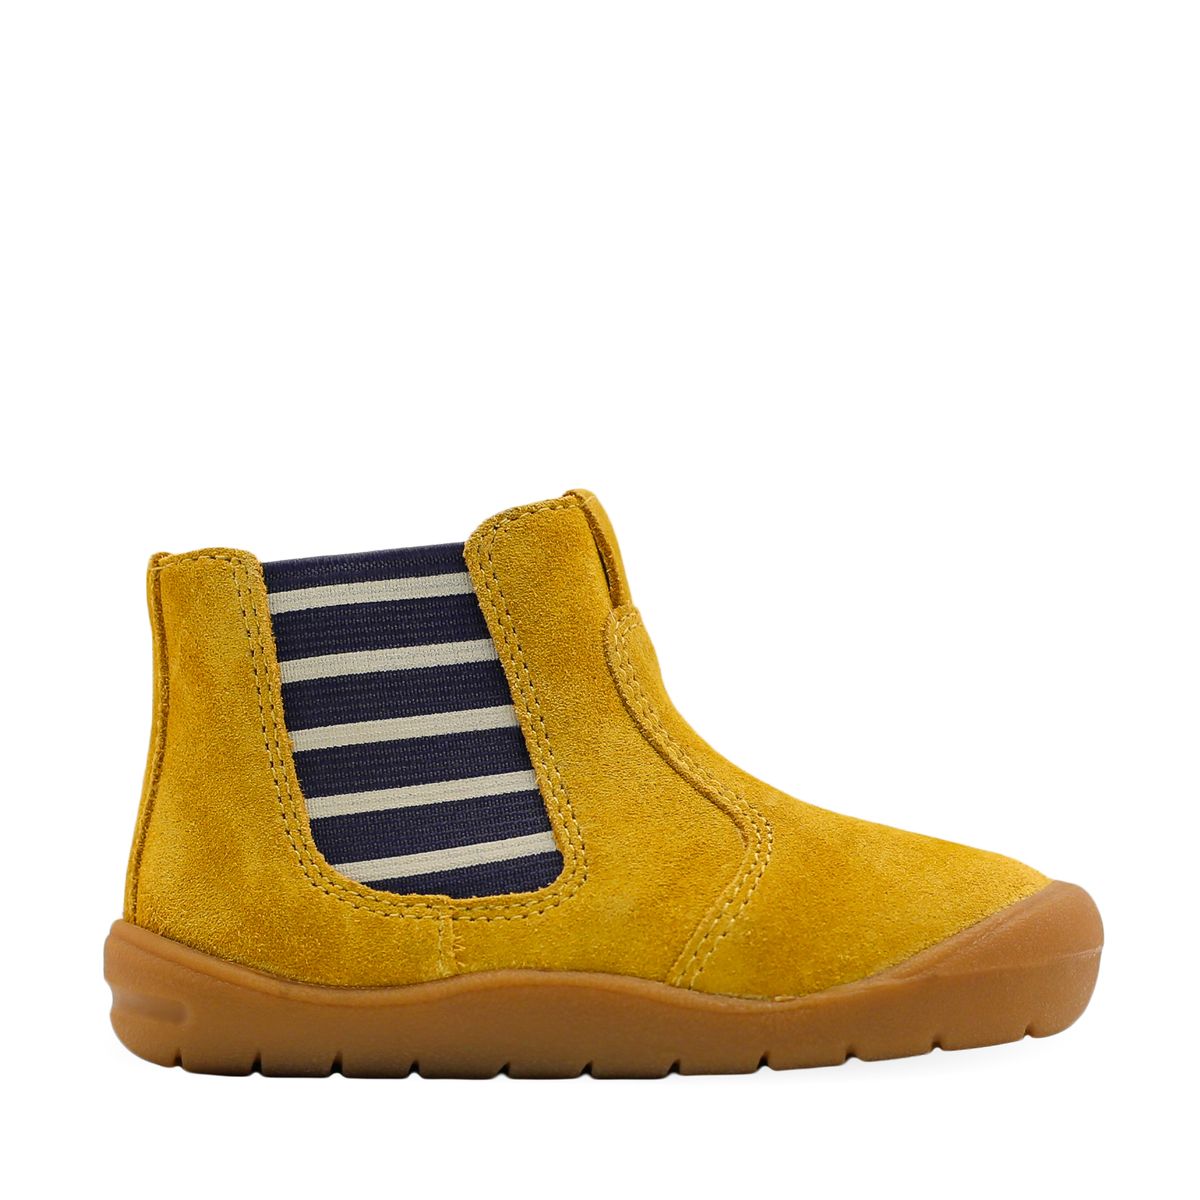 'Friend' in Harvest Gold Suede with Stripes from the exclusive Start-Rite Shoes and JoJo Maman Bébé Collection 